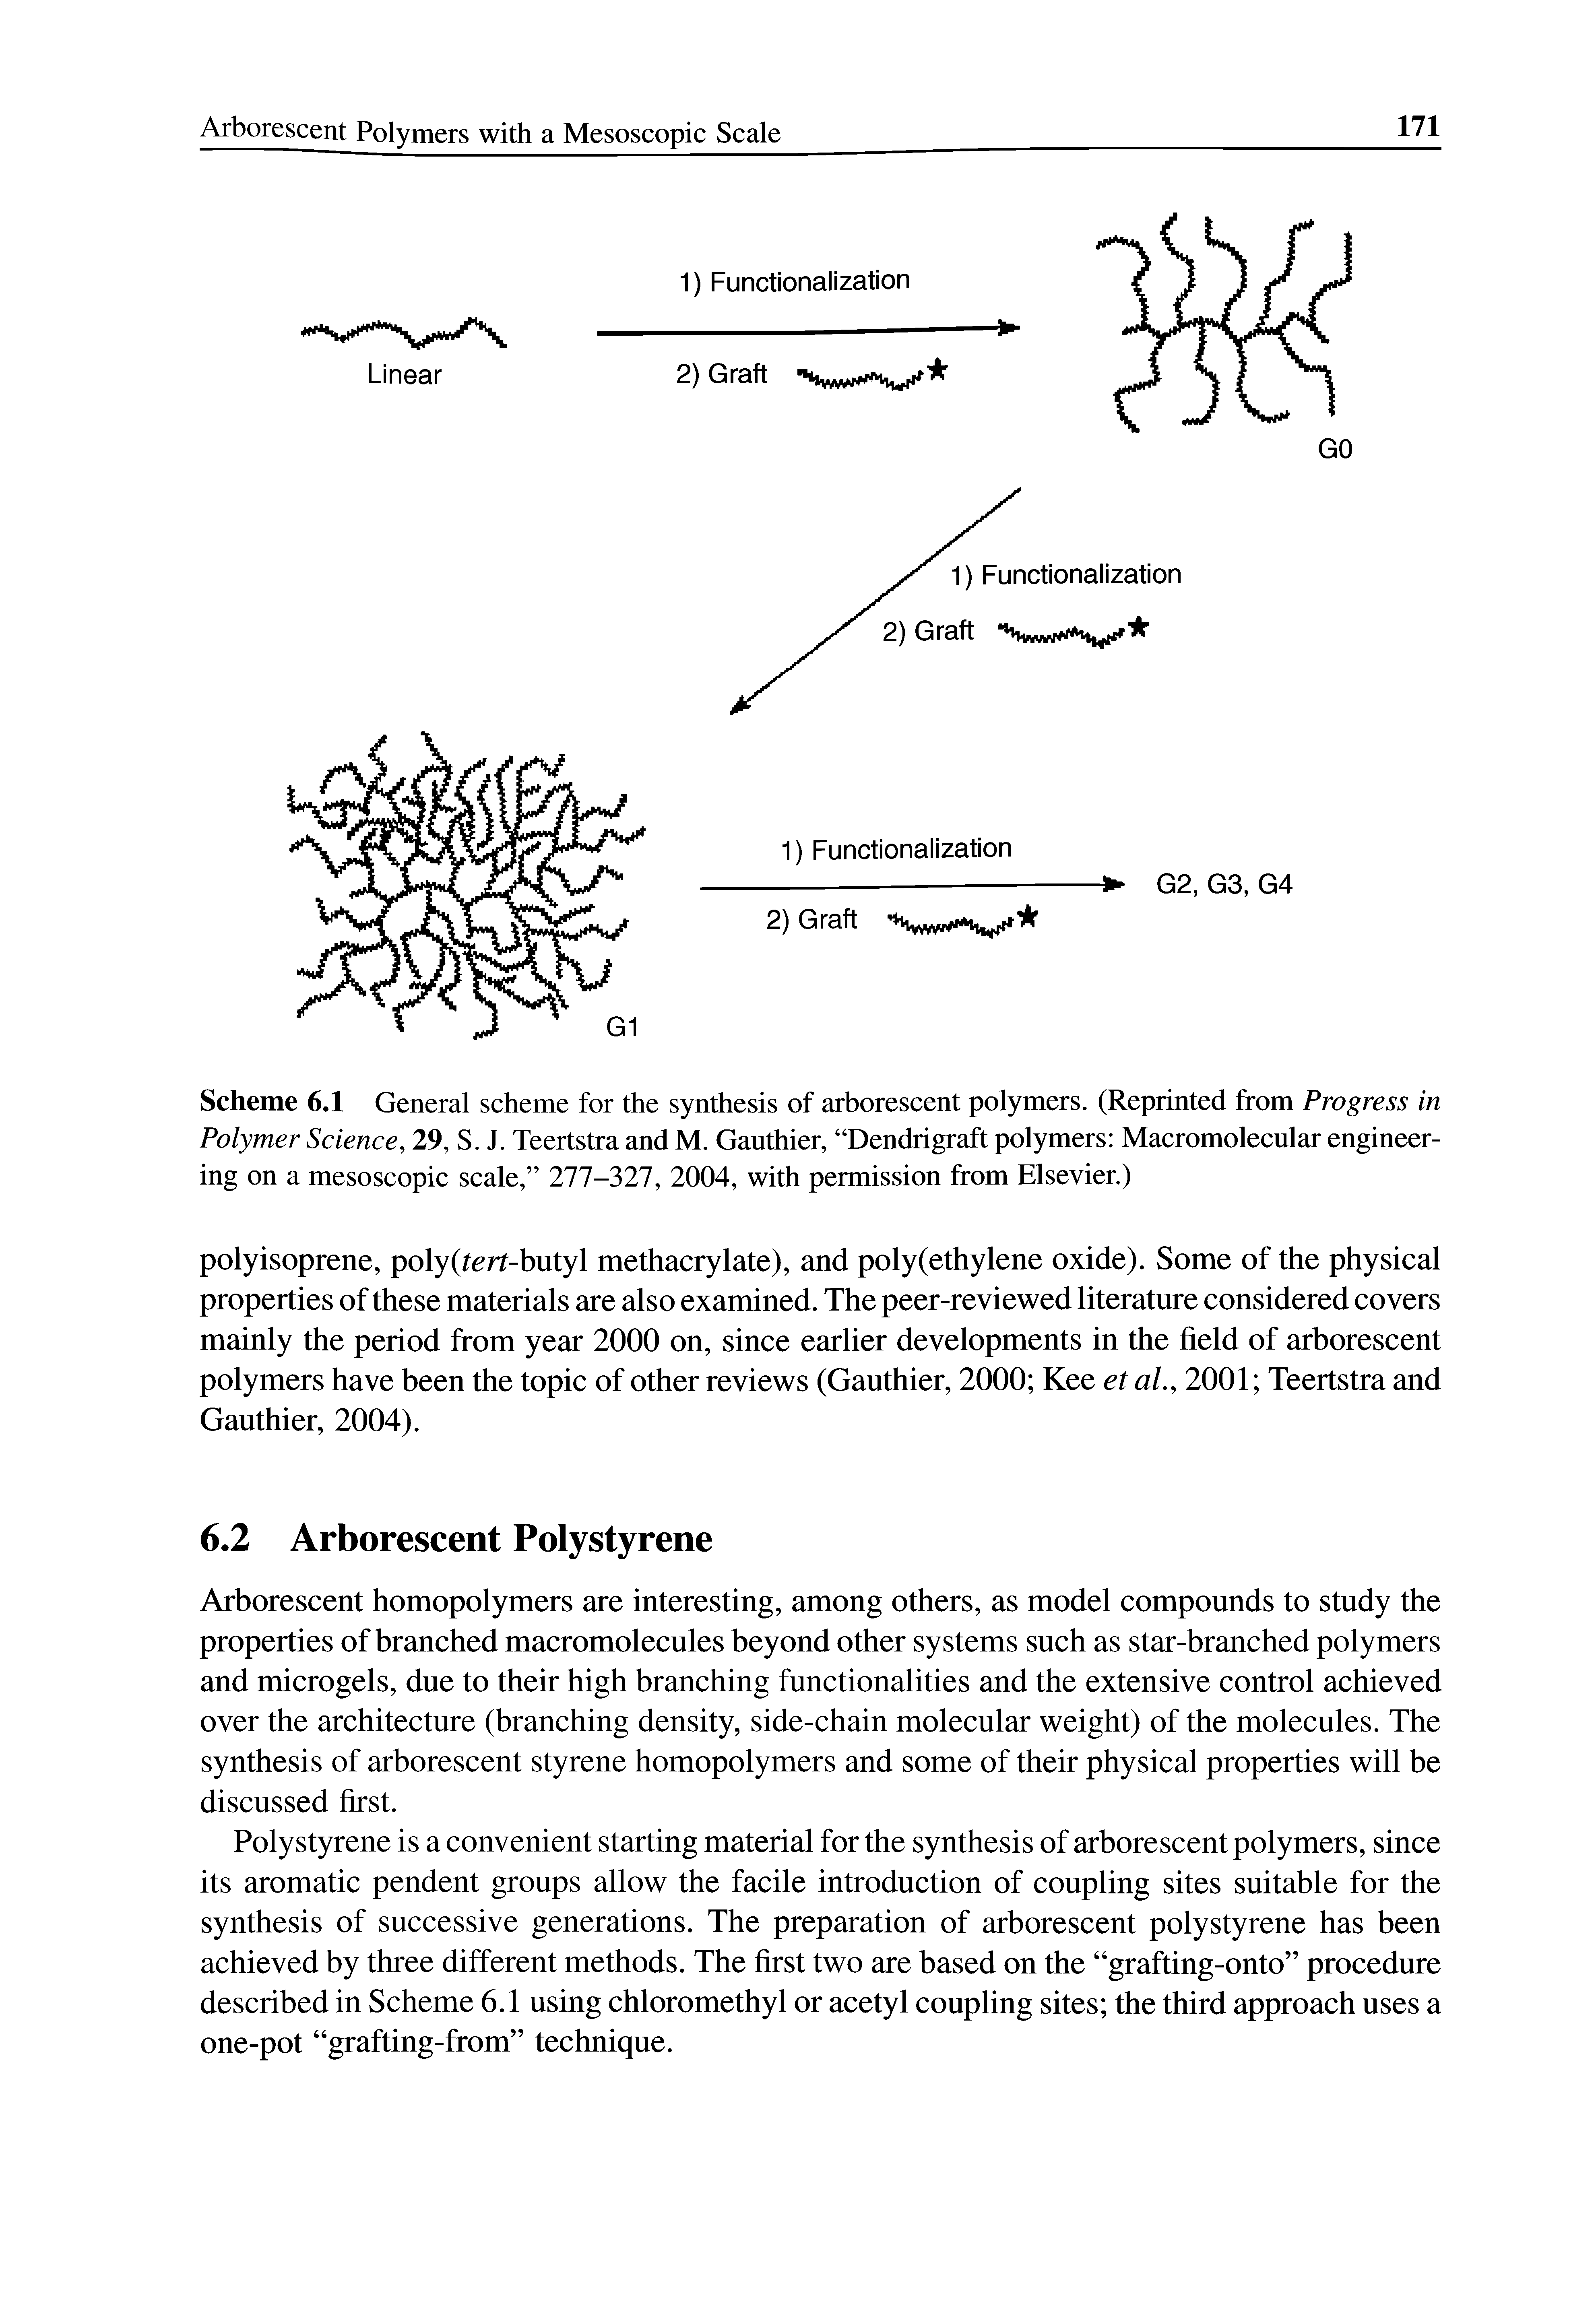 Scheme 6.1 General scheme for the synthesis of arborescent polymers. (Reprinted from Progress in Polymer Science, 29, S. J. Teertstra and M. Gauthier, Dendrigraft polymers Macromolecular engineering on a mesoscopic scale, 277-327, 2004, with permission from Elsevier.)...